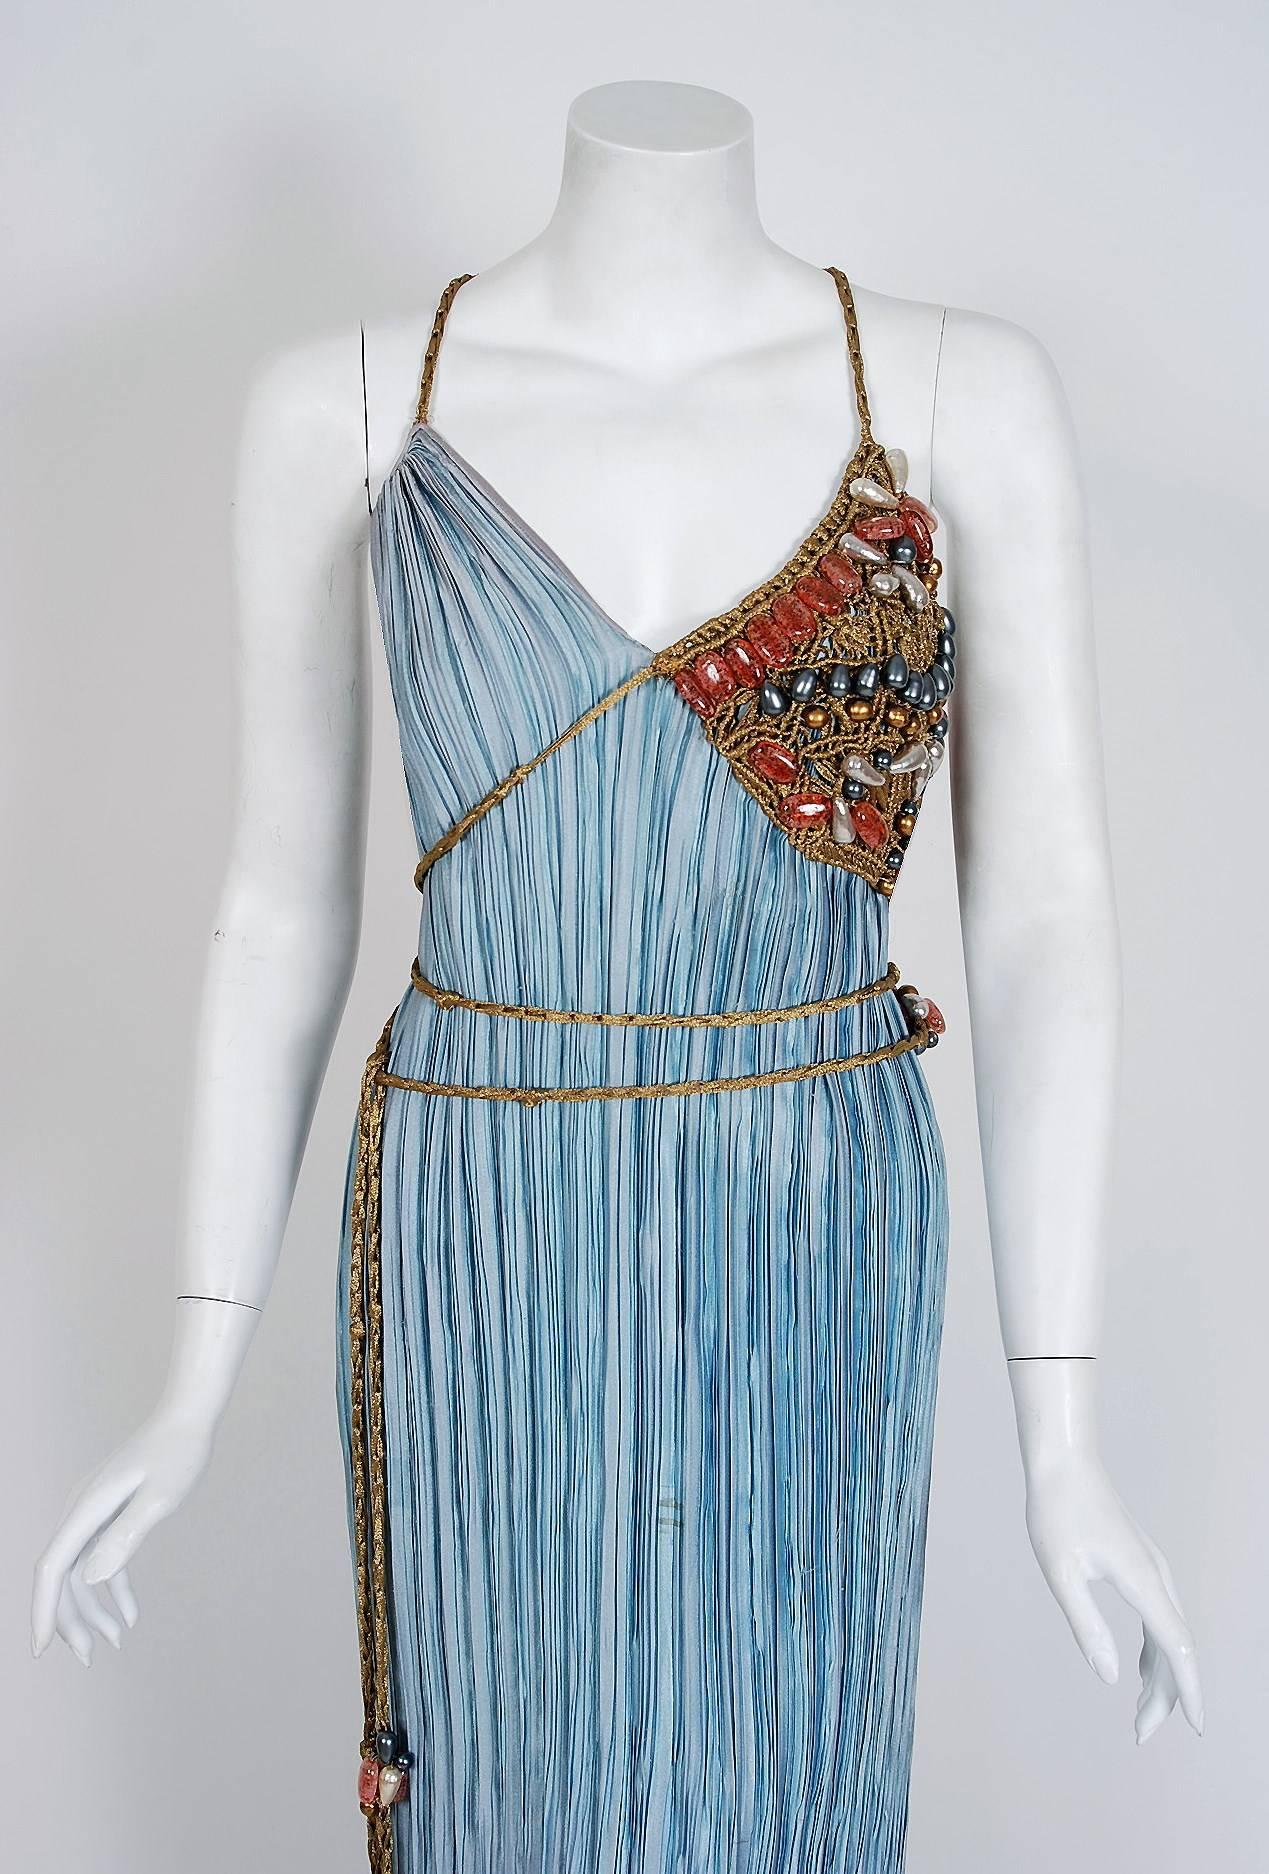 Breathtaking Mary McFadden Couture sky-blue goddess gown dating back to the late 1970's. McFadden designed with a relative unconcern for fashion trends. Instead, she used her talent as a way to explore her personal interests: visual art and the